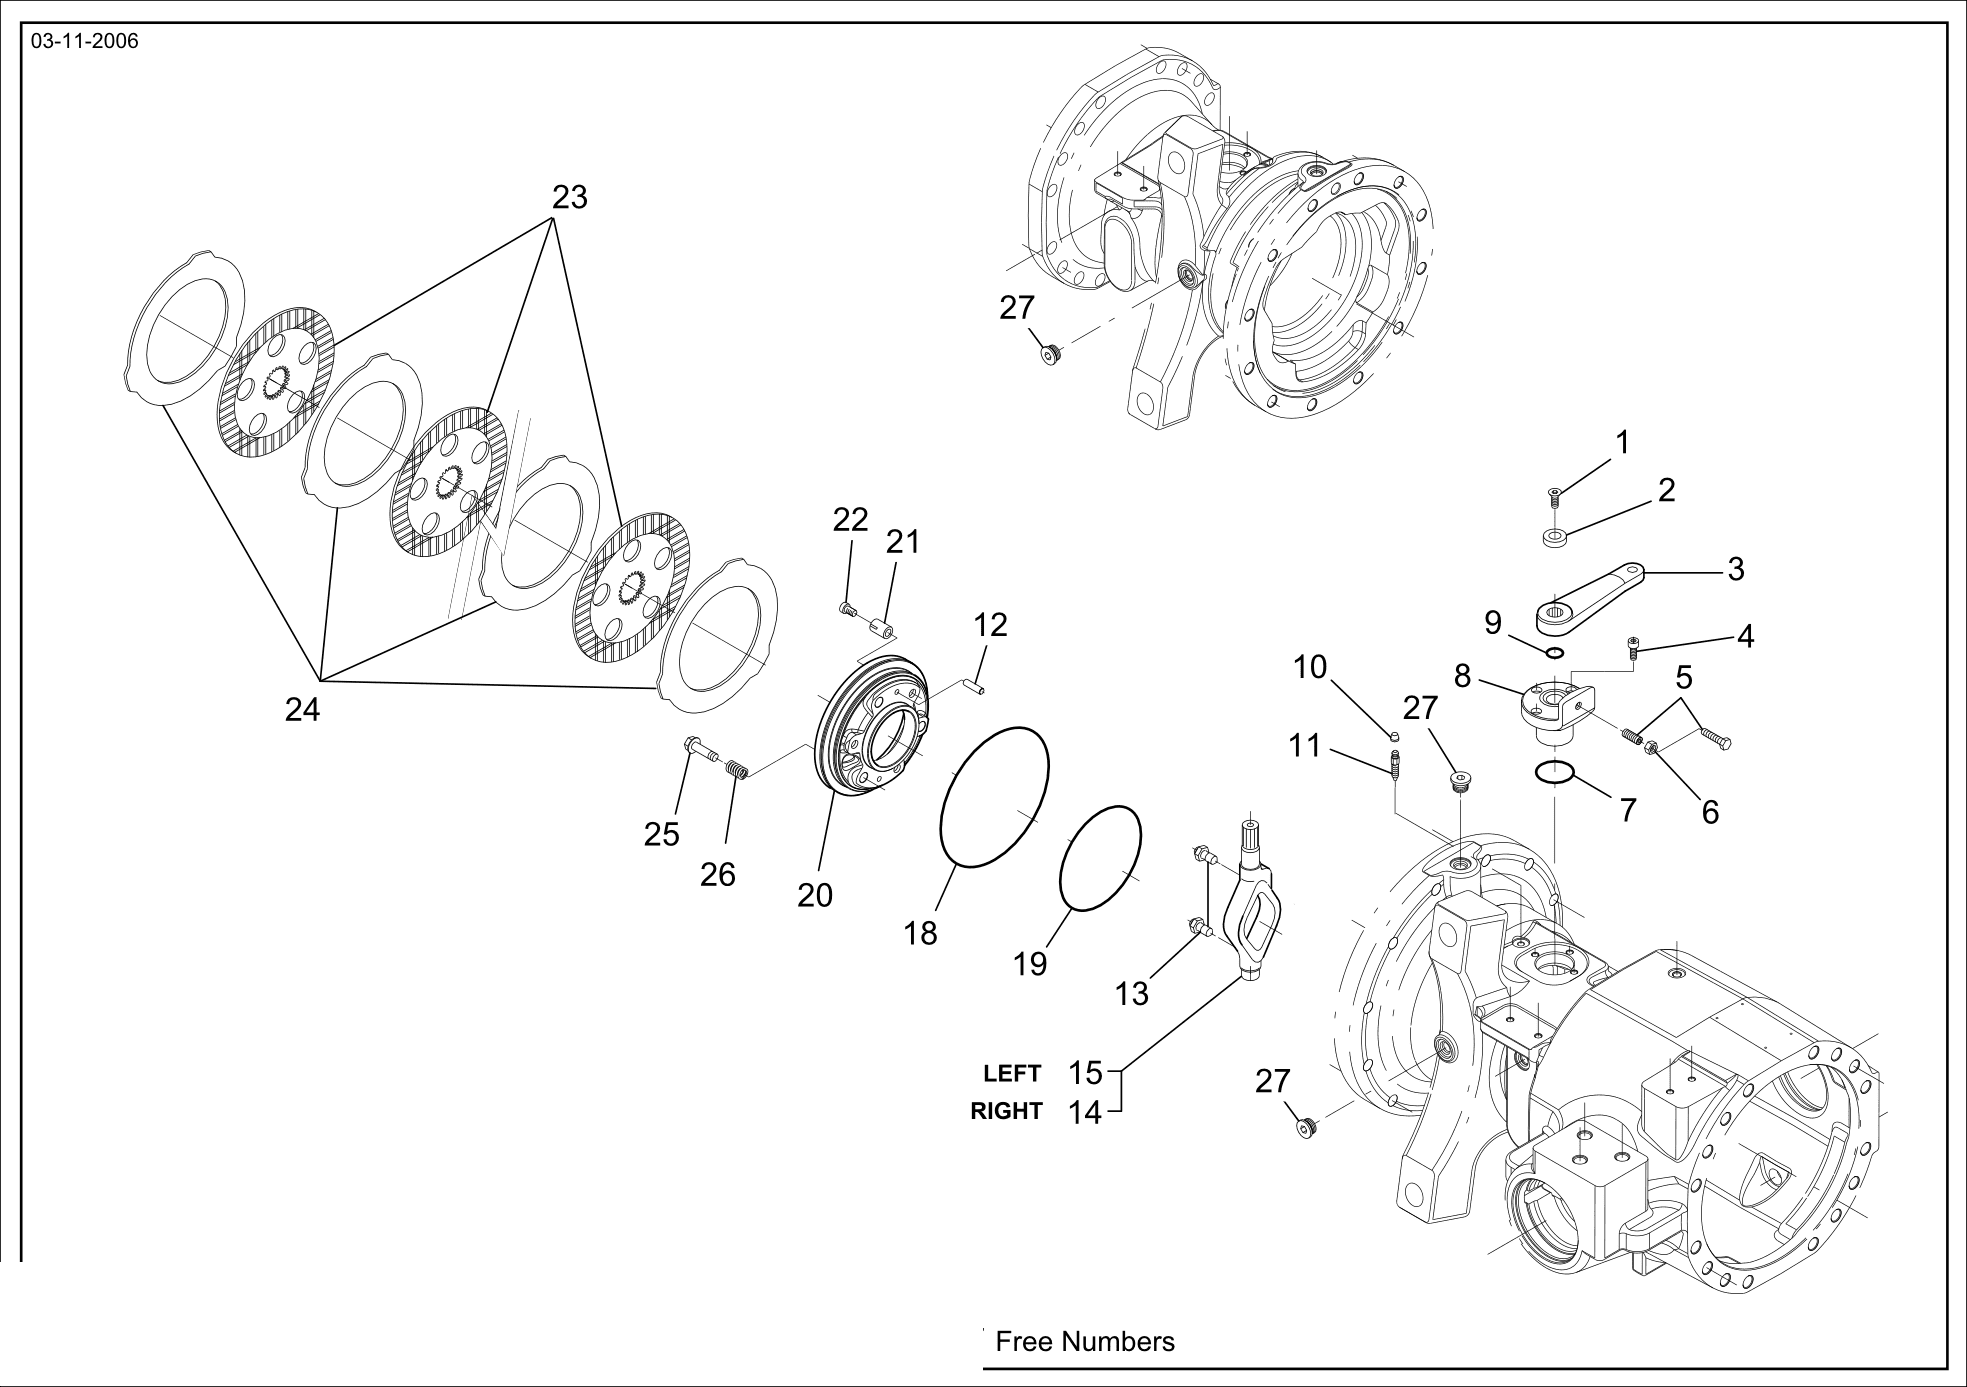 drawing for WEILER 13967C101 - LEVER (figure 5)